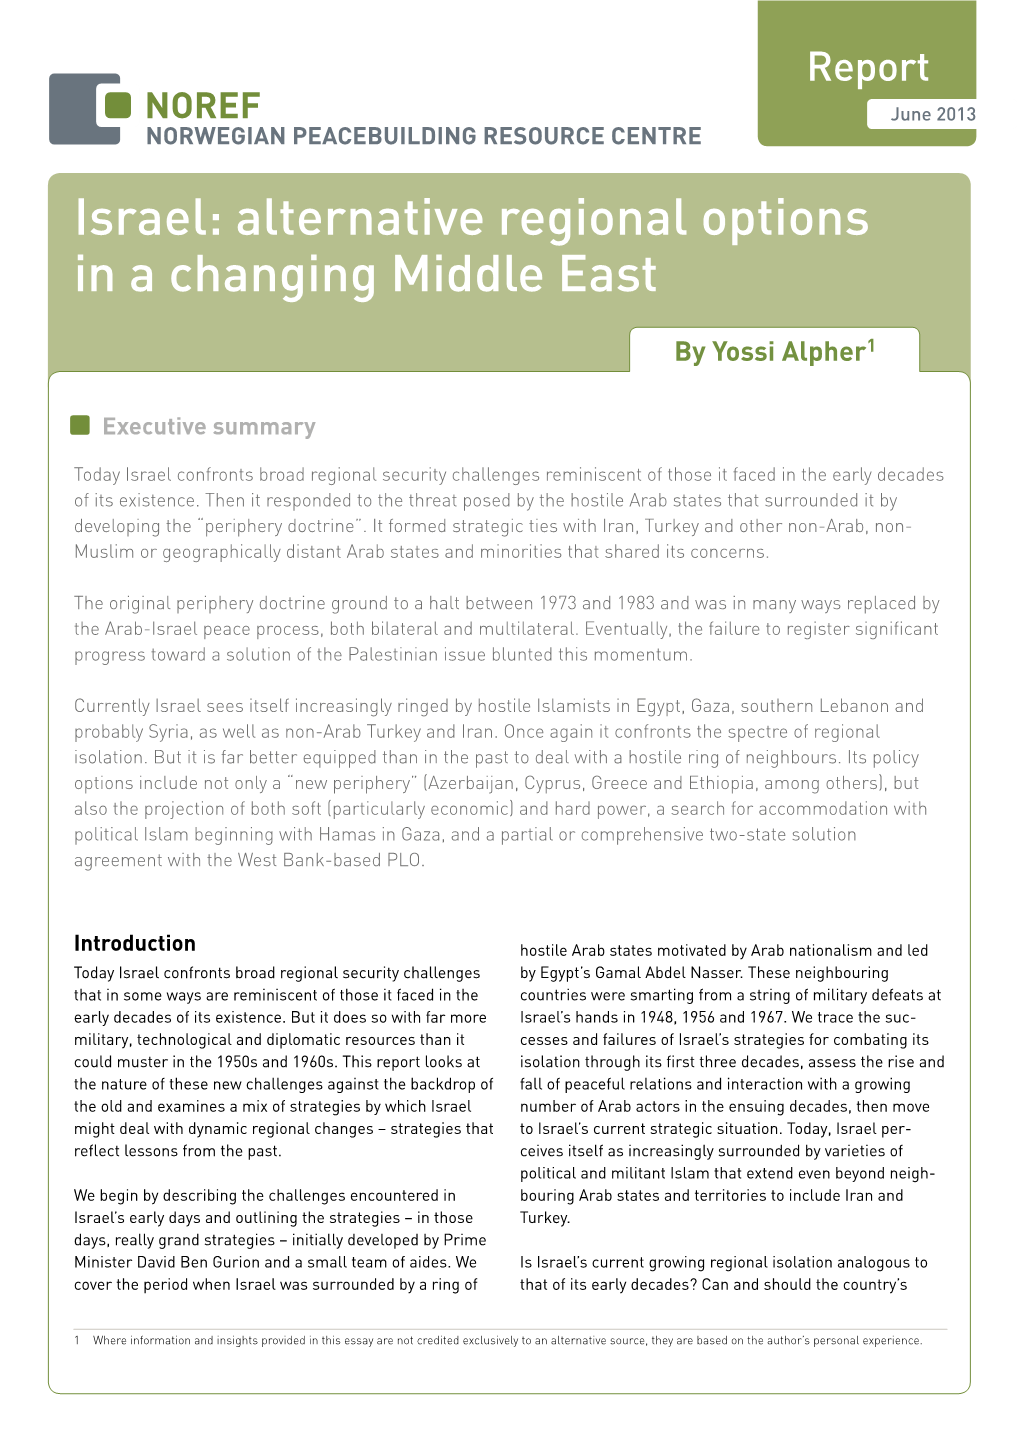 Israel: Alternative Regional Options in a Changing Middle East